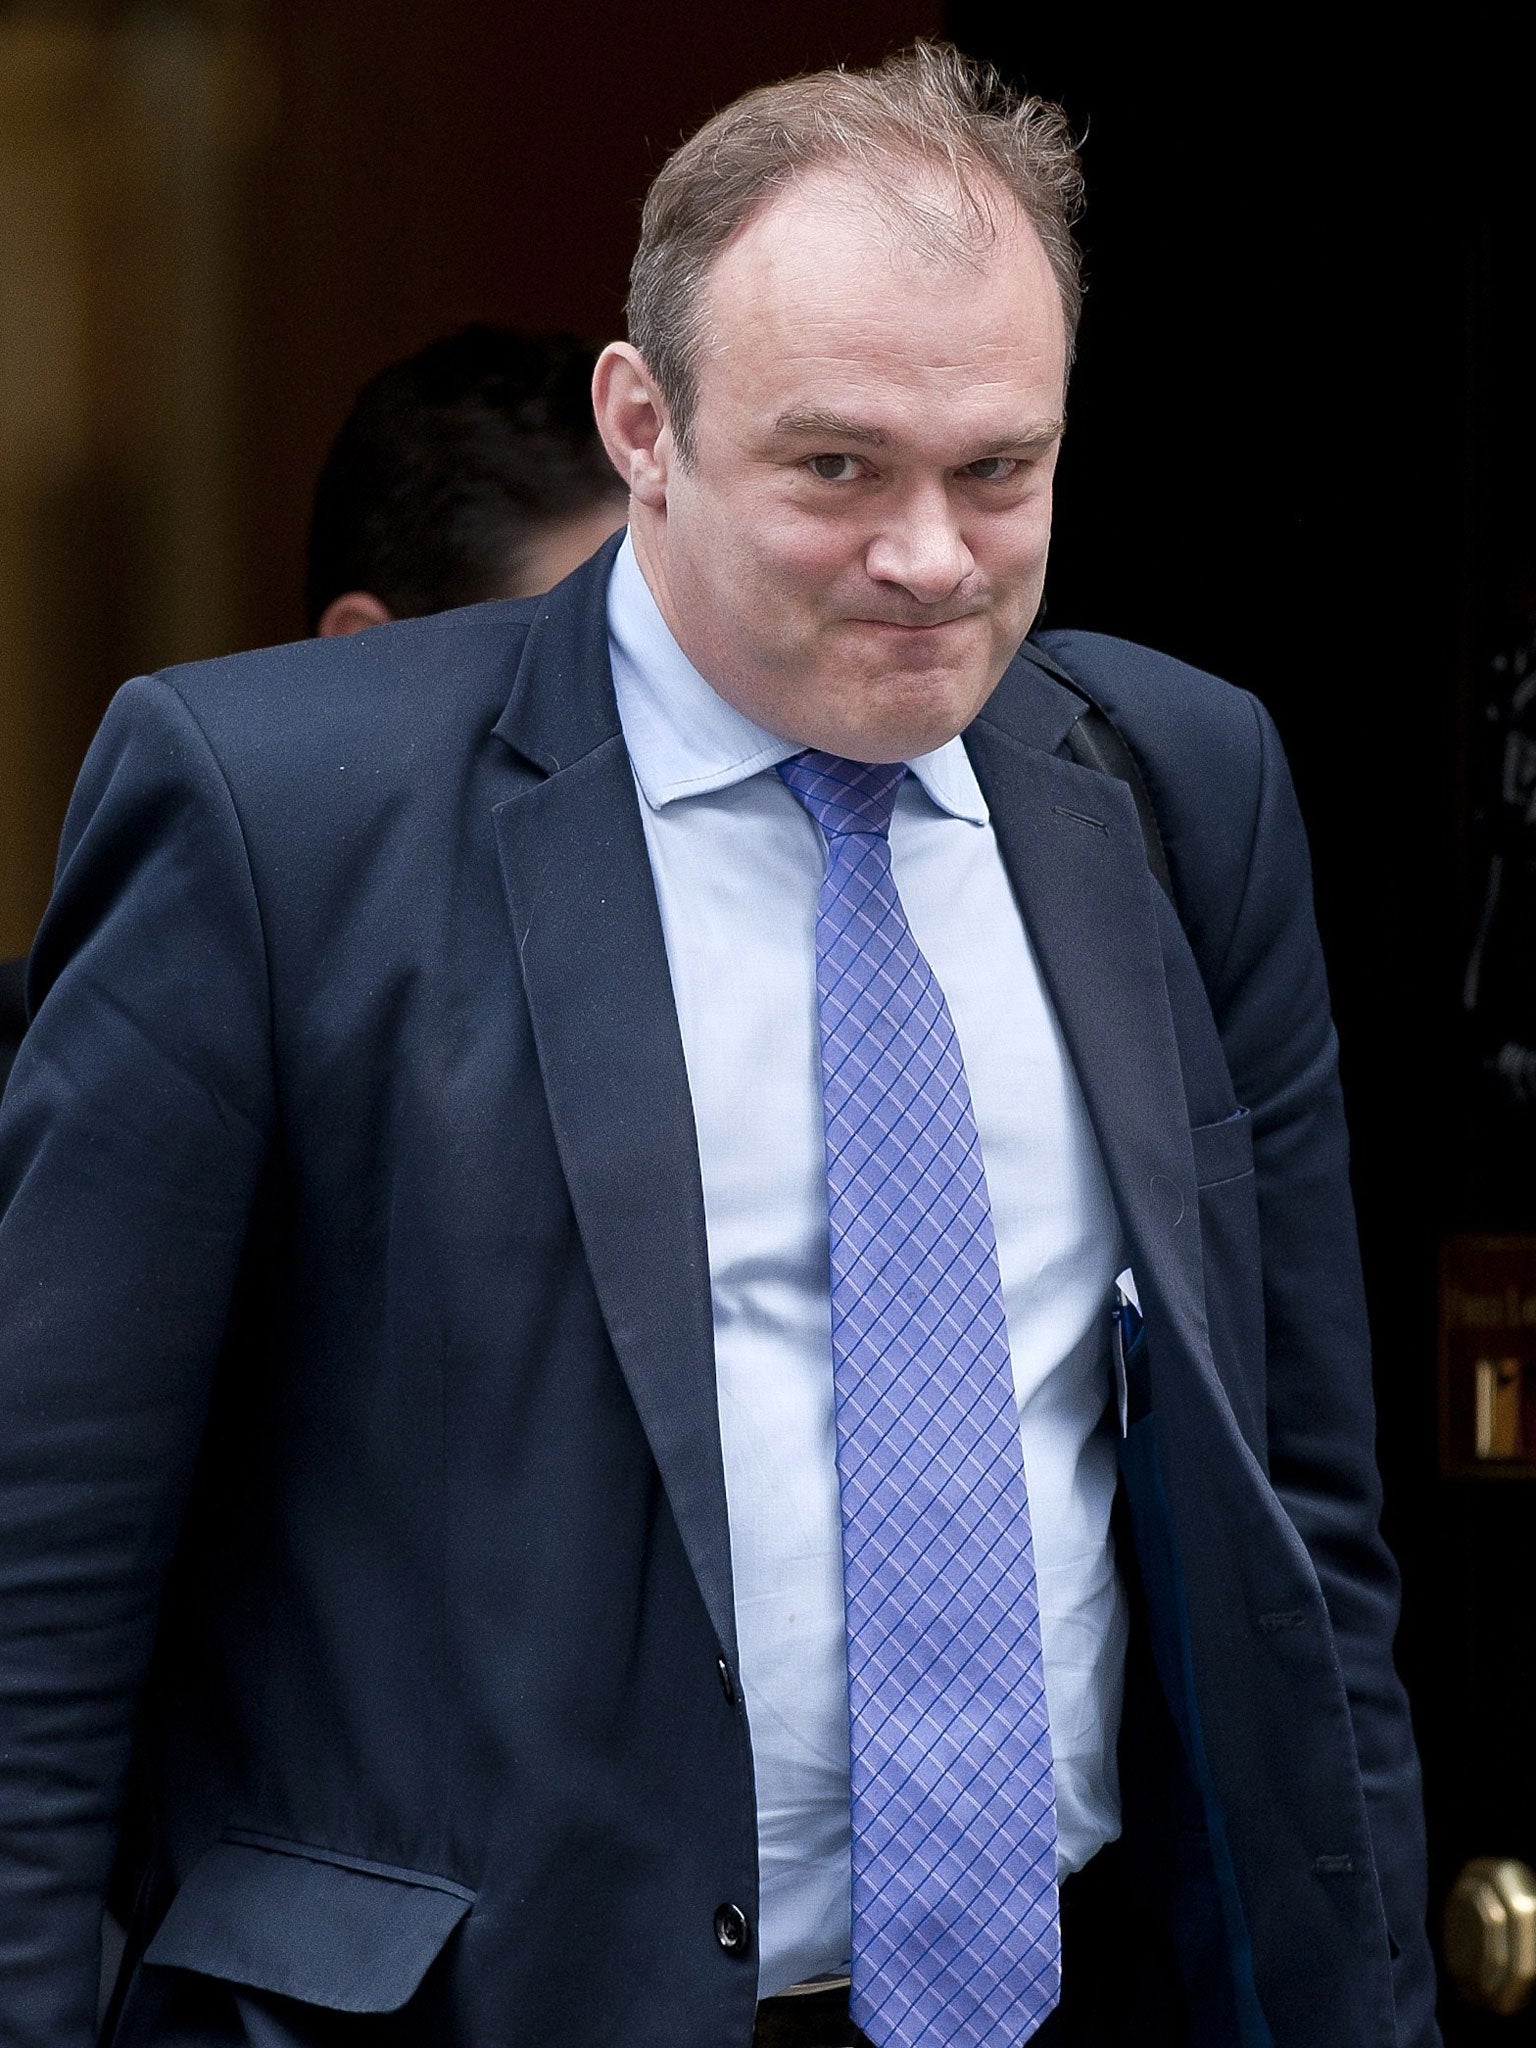 Secretary for Energy and Climate Change, Ed Davey